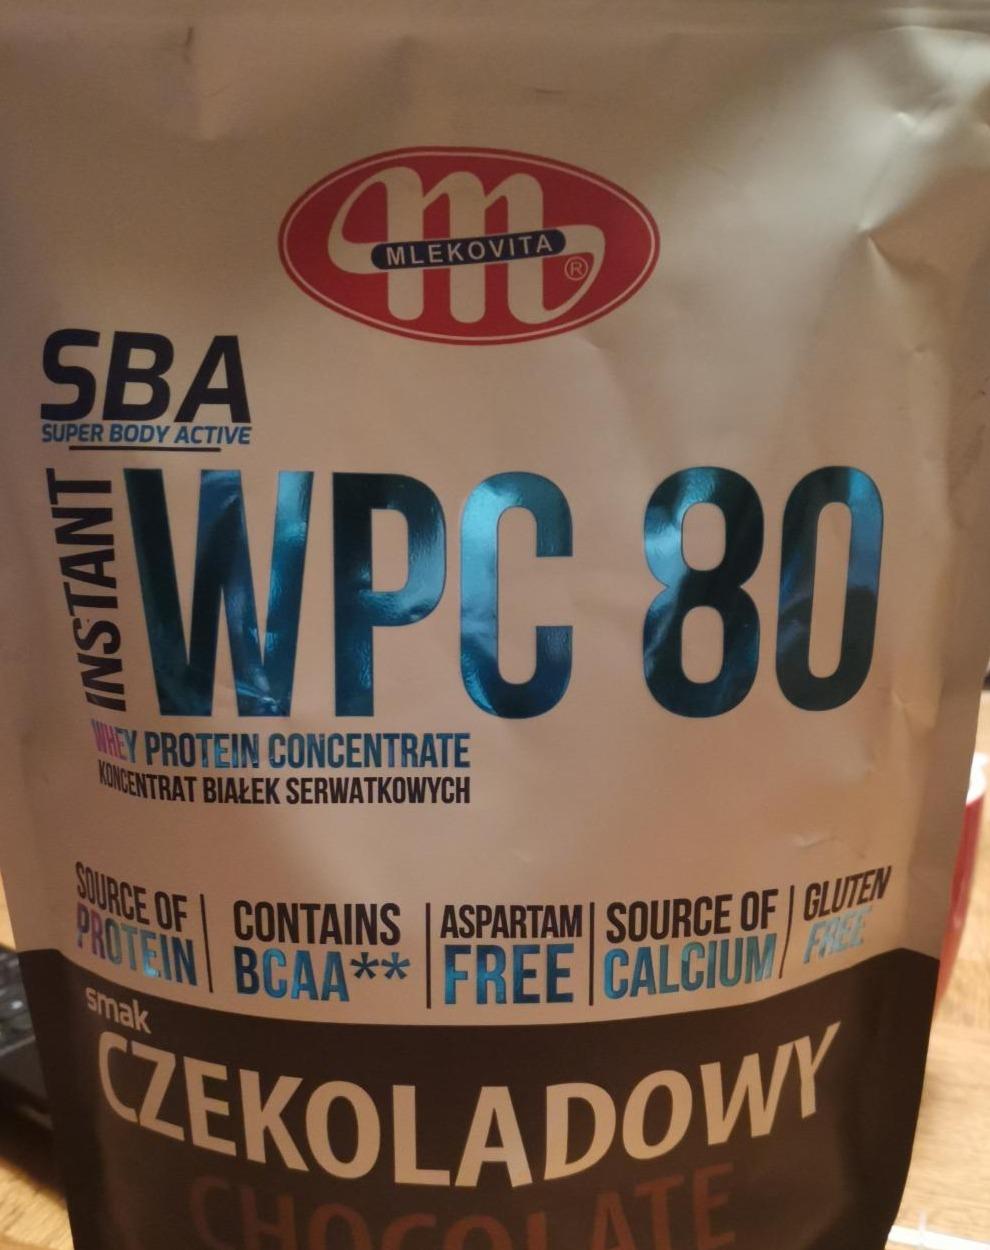 Fotografie - Super Body Active WPC 80 Chocolate Whey Protein Concentrate Mlekovita